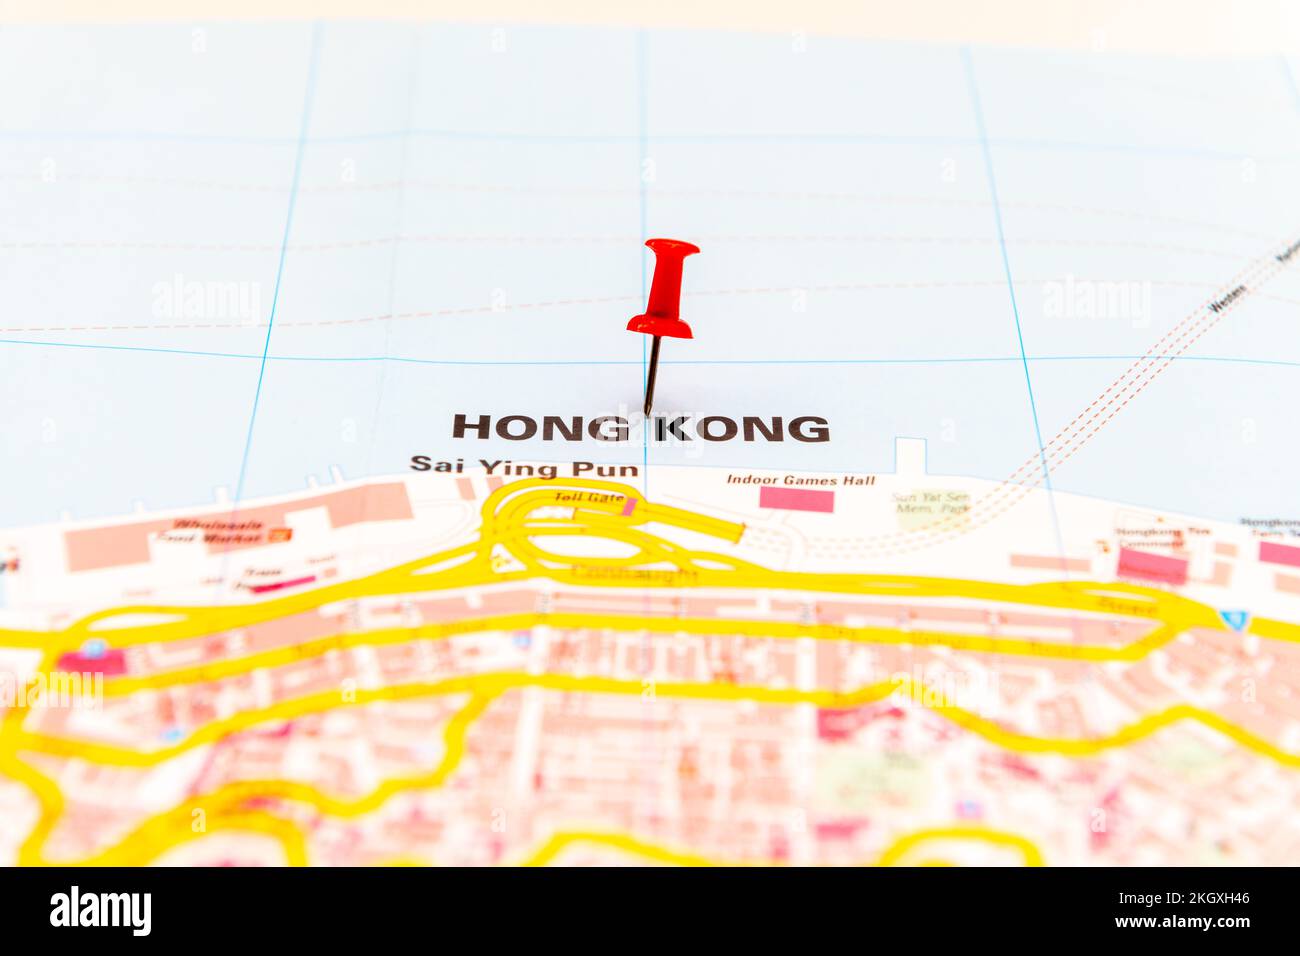 The map location of Hong kong island, China, marked by a red pushpin. Stock Photo